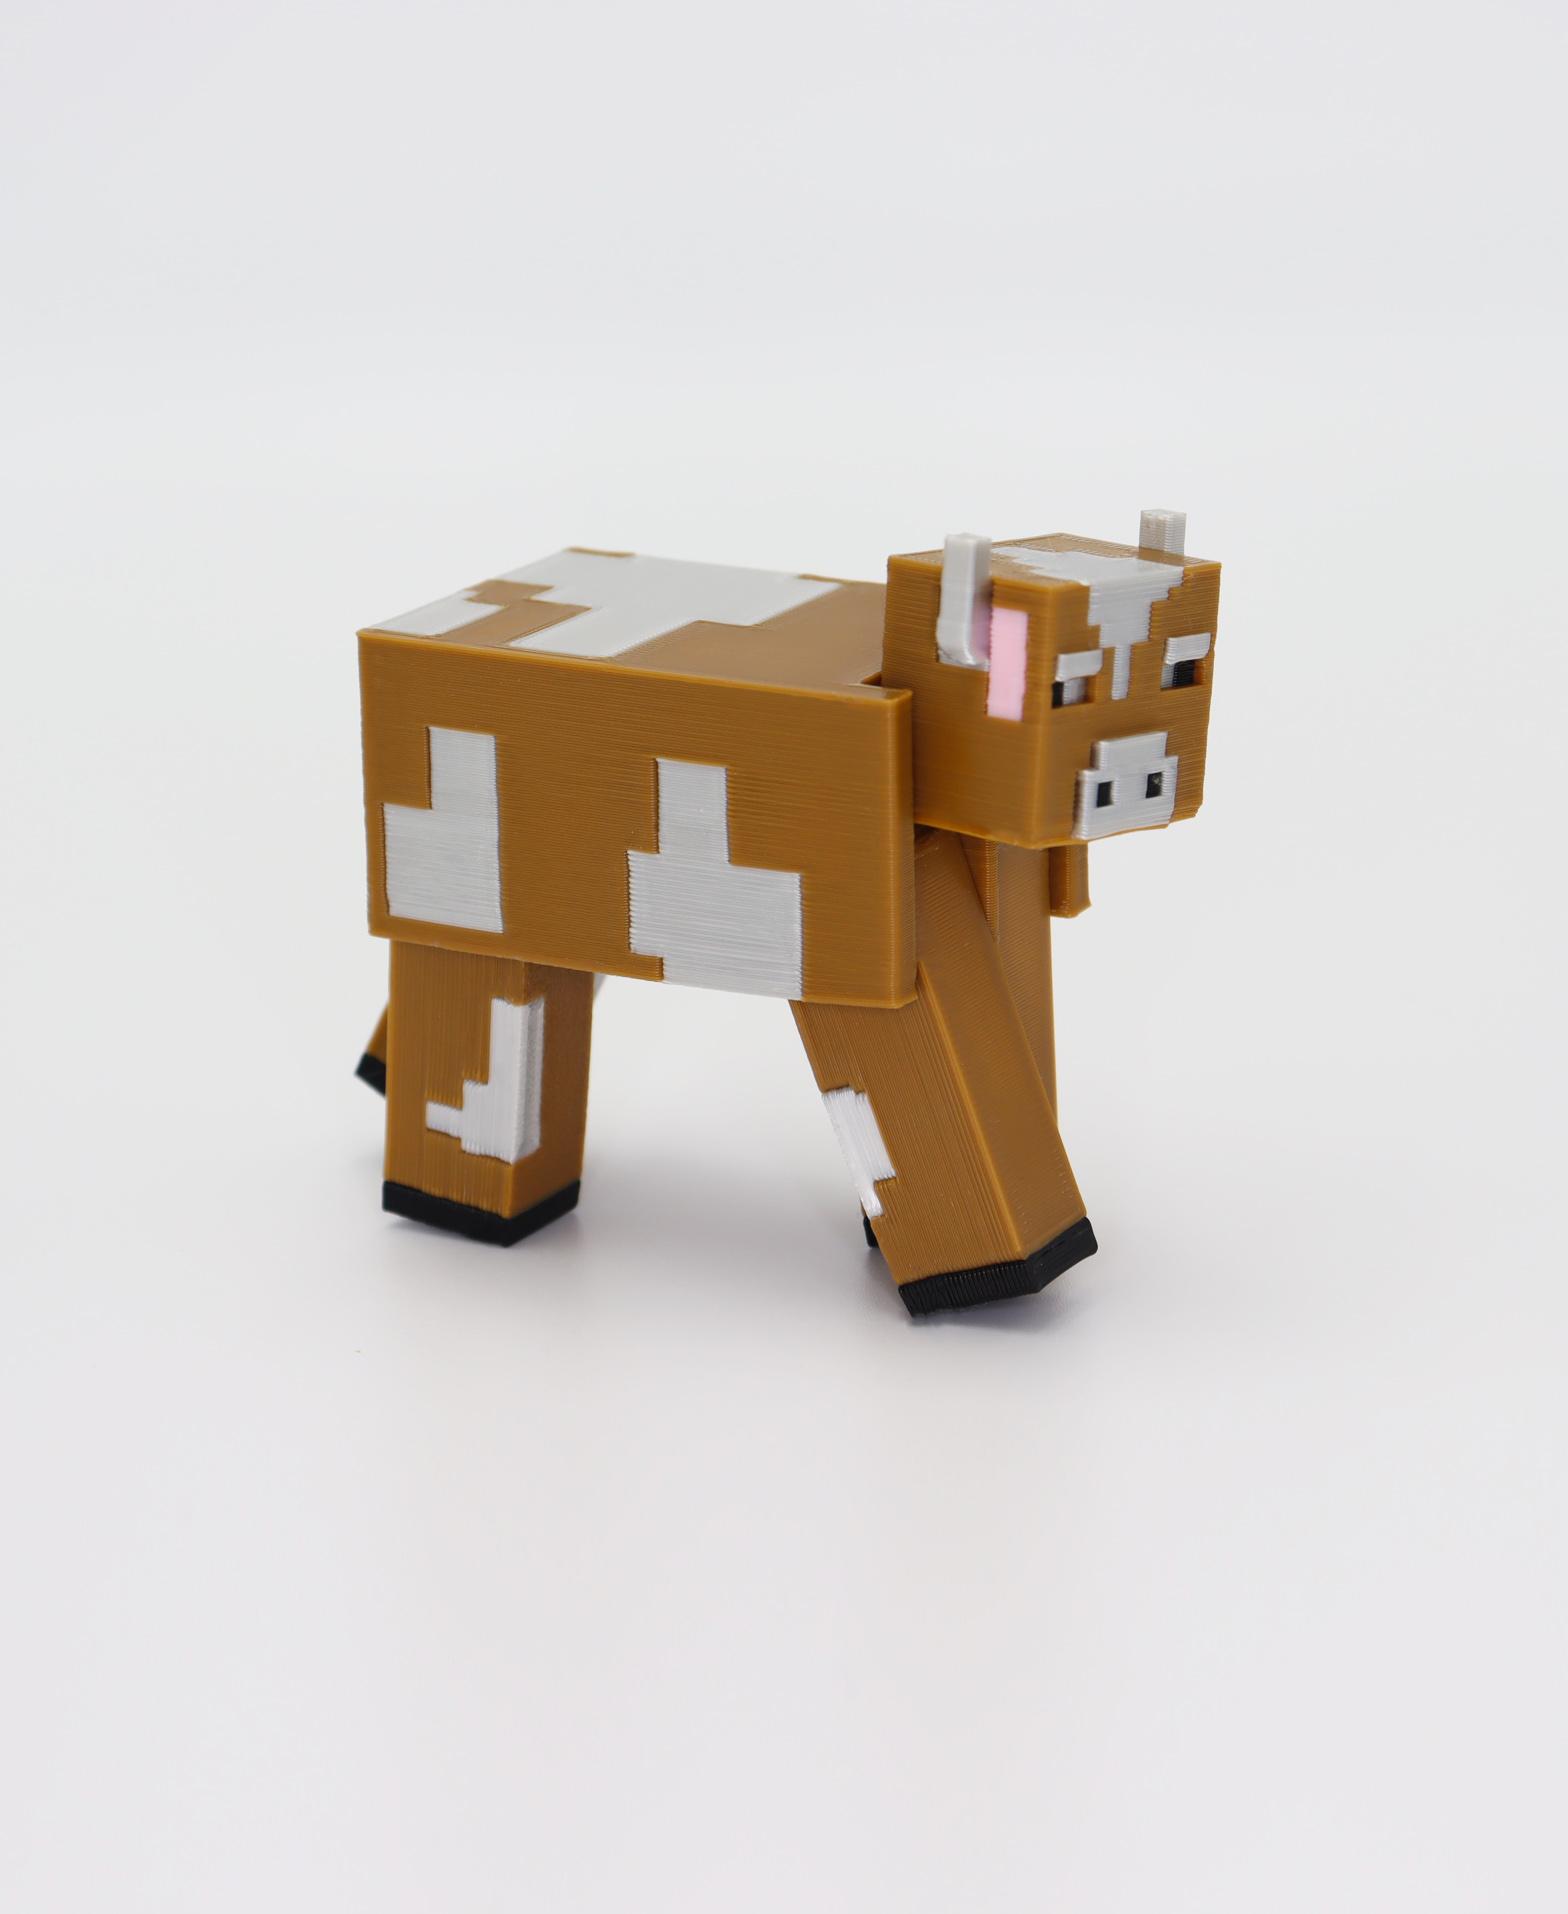 Cow fully articulated 3d model